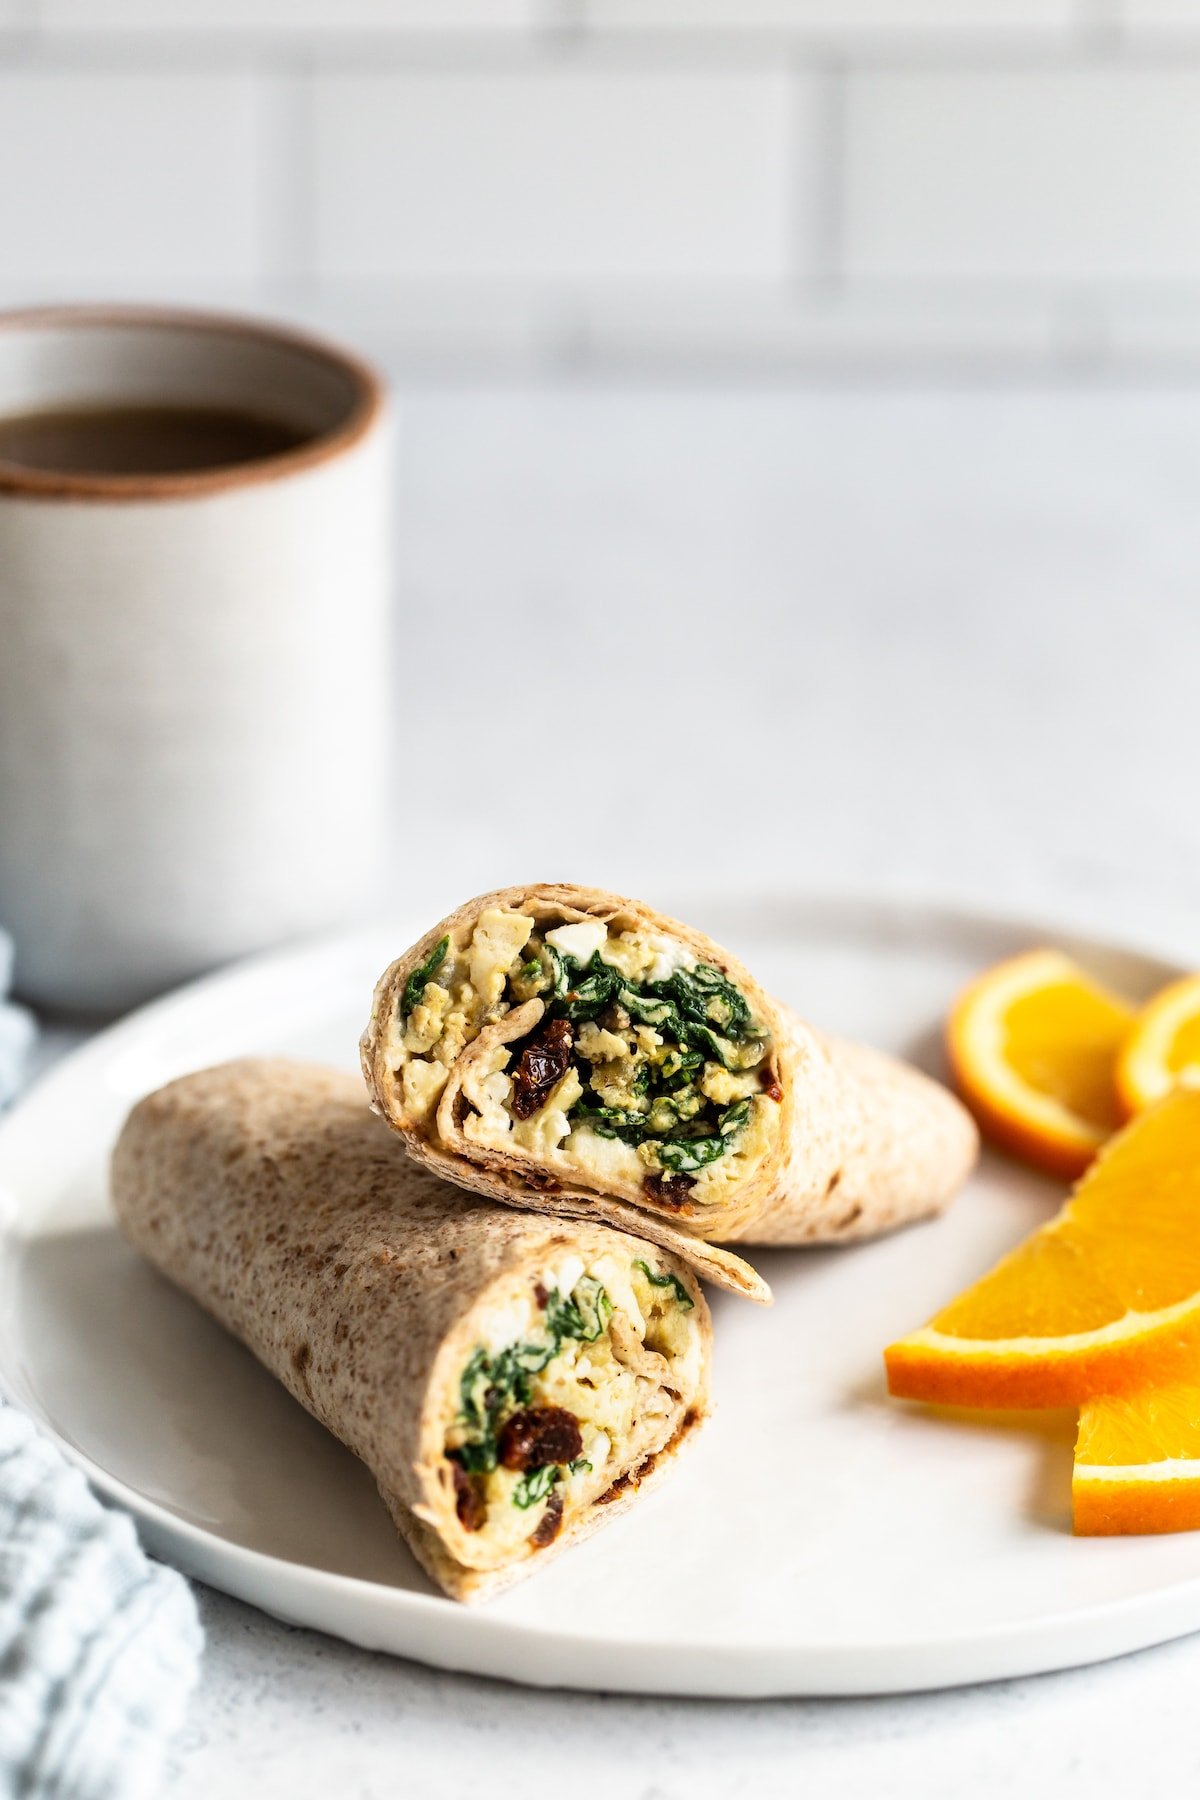 Egg breakfast wrap on a plate with orange slices.